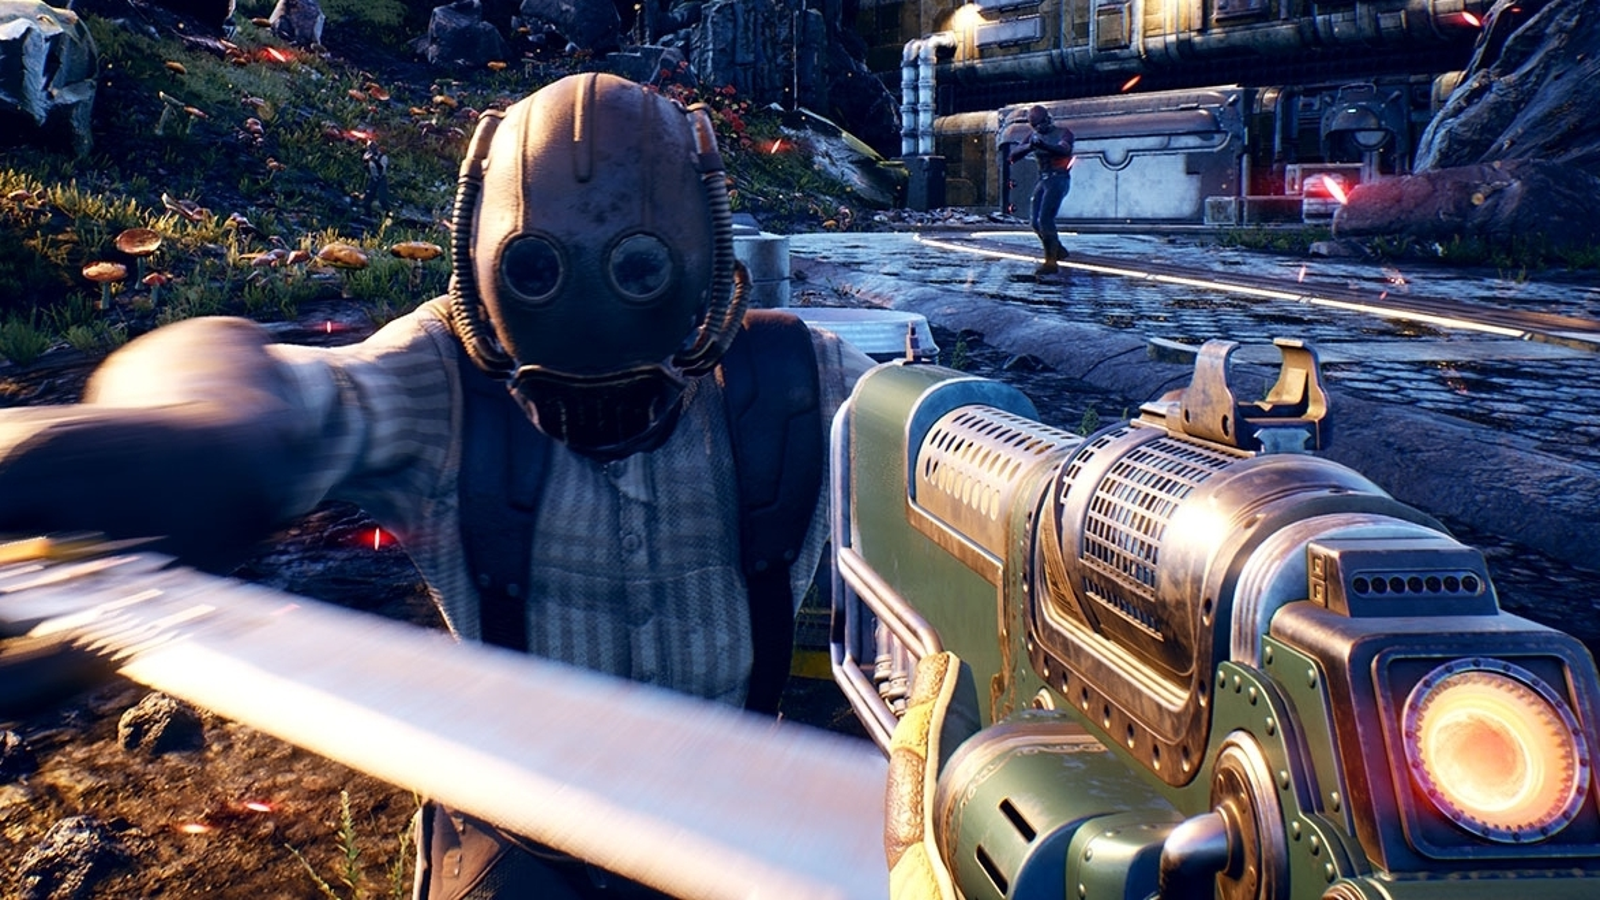 Get a closer look at Obsidian's The Outer Worlds with 15 minutes of gameplay  footage